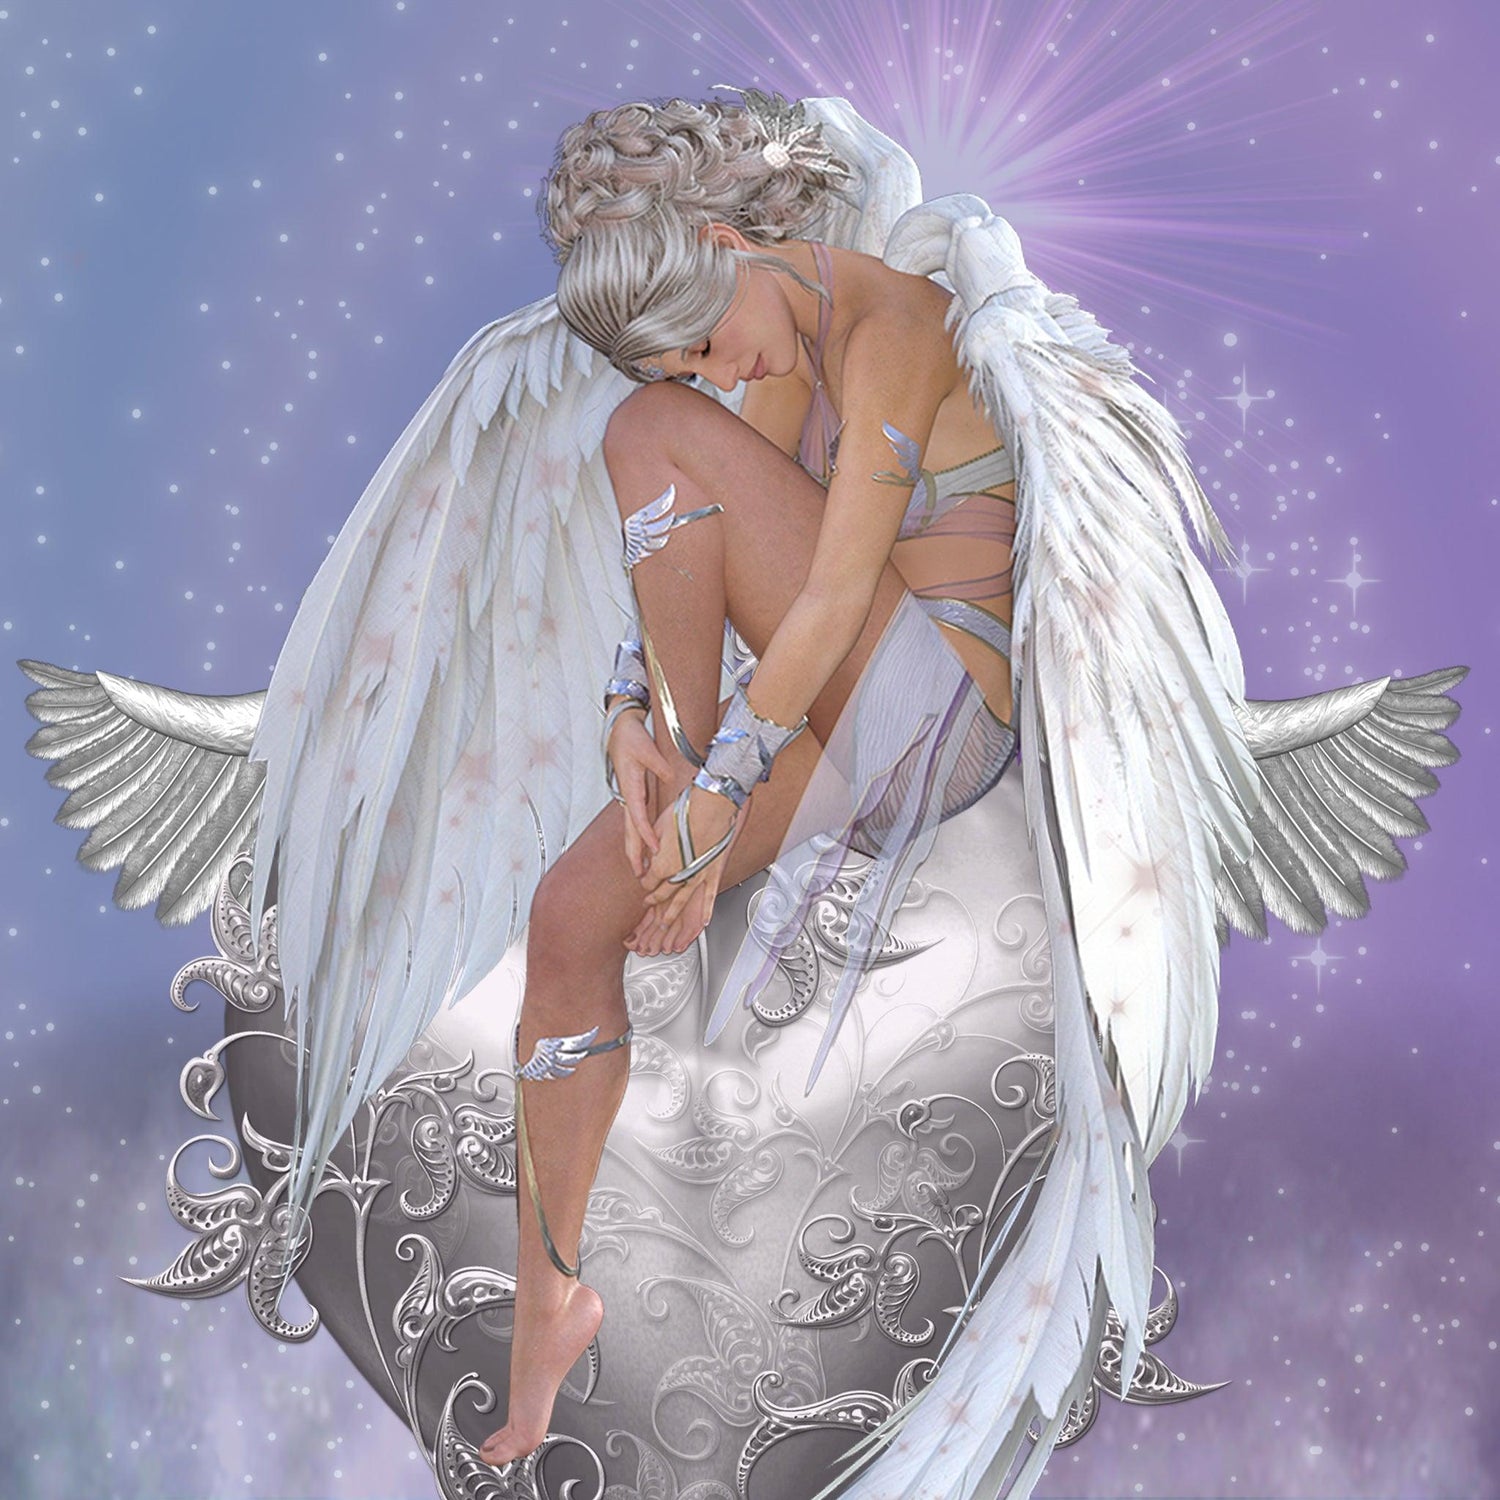 More Than Charms More Than Charms Club Collection: Manifest Dreams Manifest your Dreams by connecting with one of our Spirit Guides: Angels, Archangels and Angelic Realms Ascended Masters, Gods and Goddesses such as Gaia and Star Sign Goddesses They are a